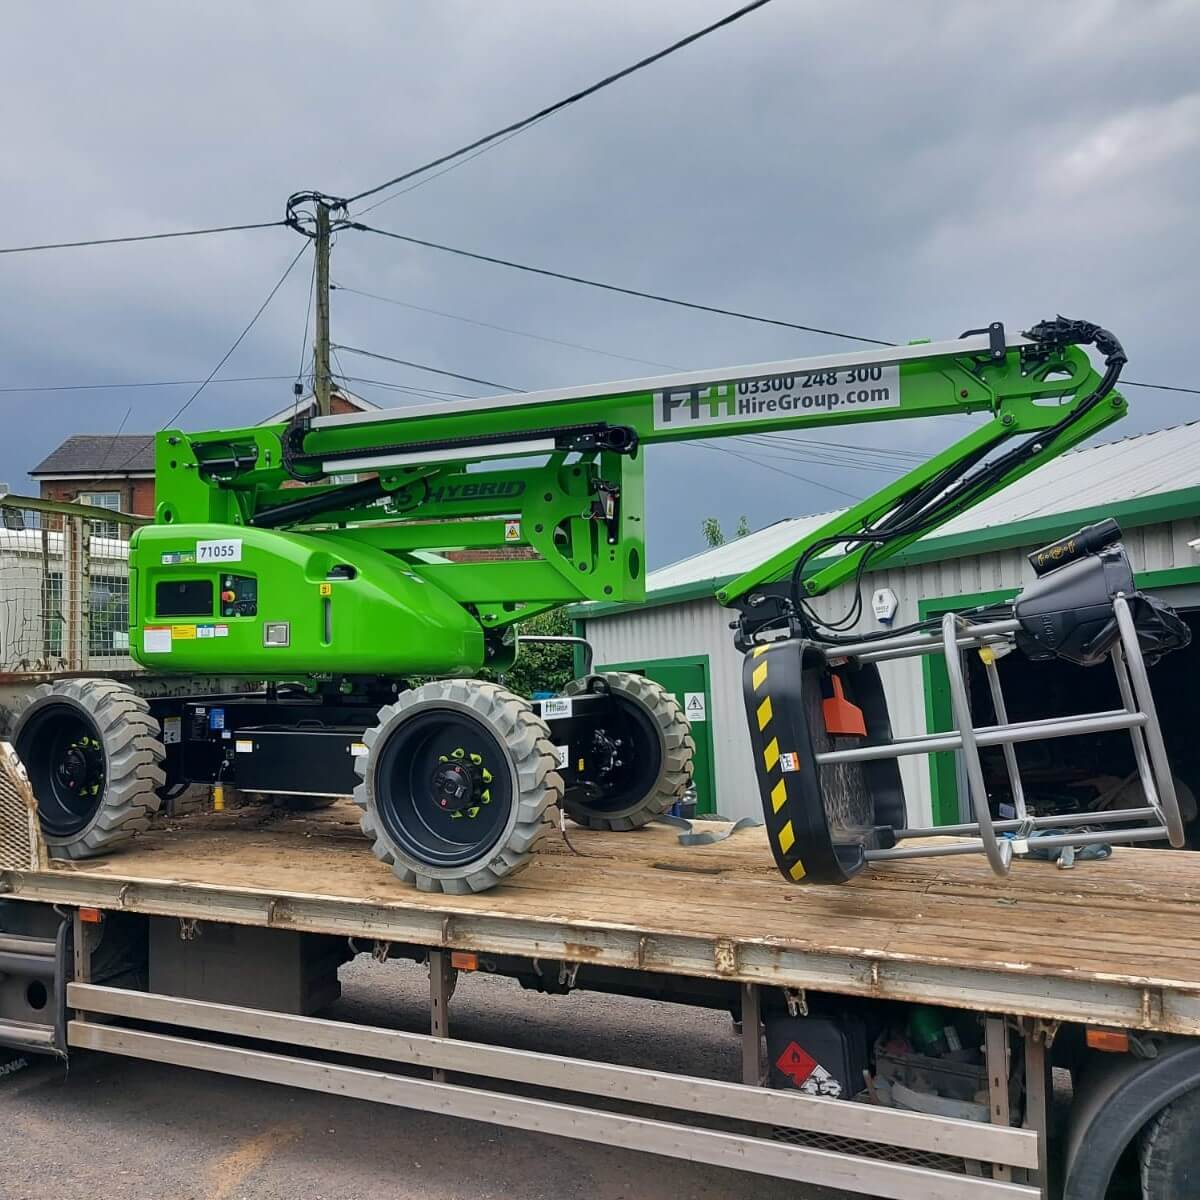 New Hybrid 4x4 Self-Propelled Boom Lifts join the FTH Hire Group Fleet 